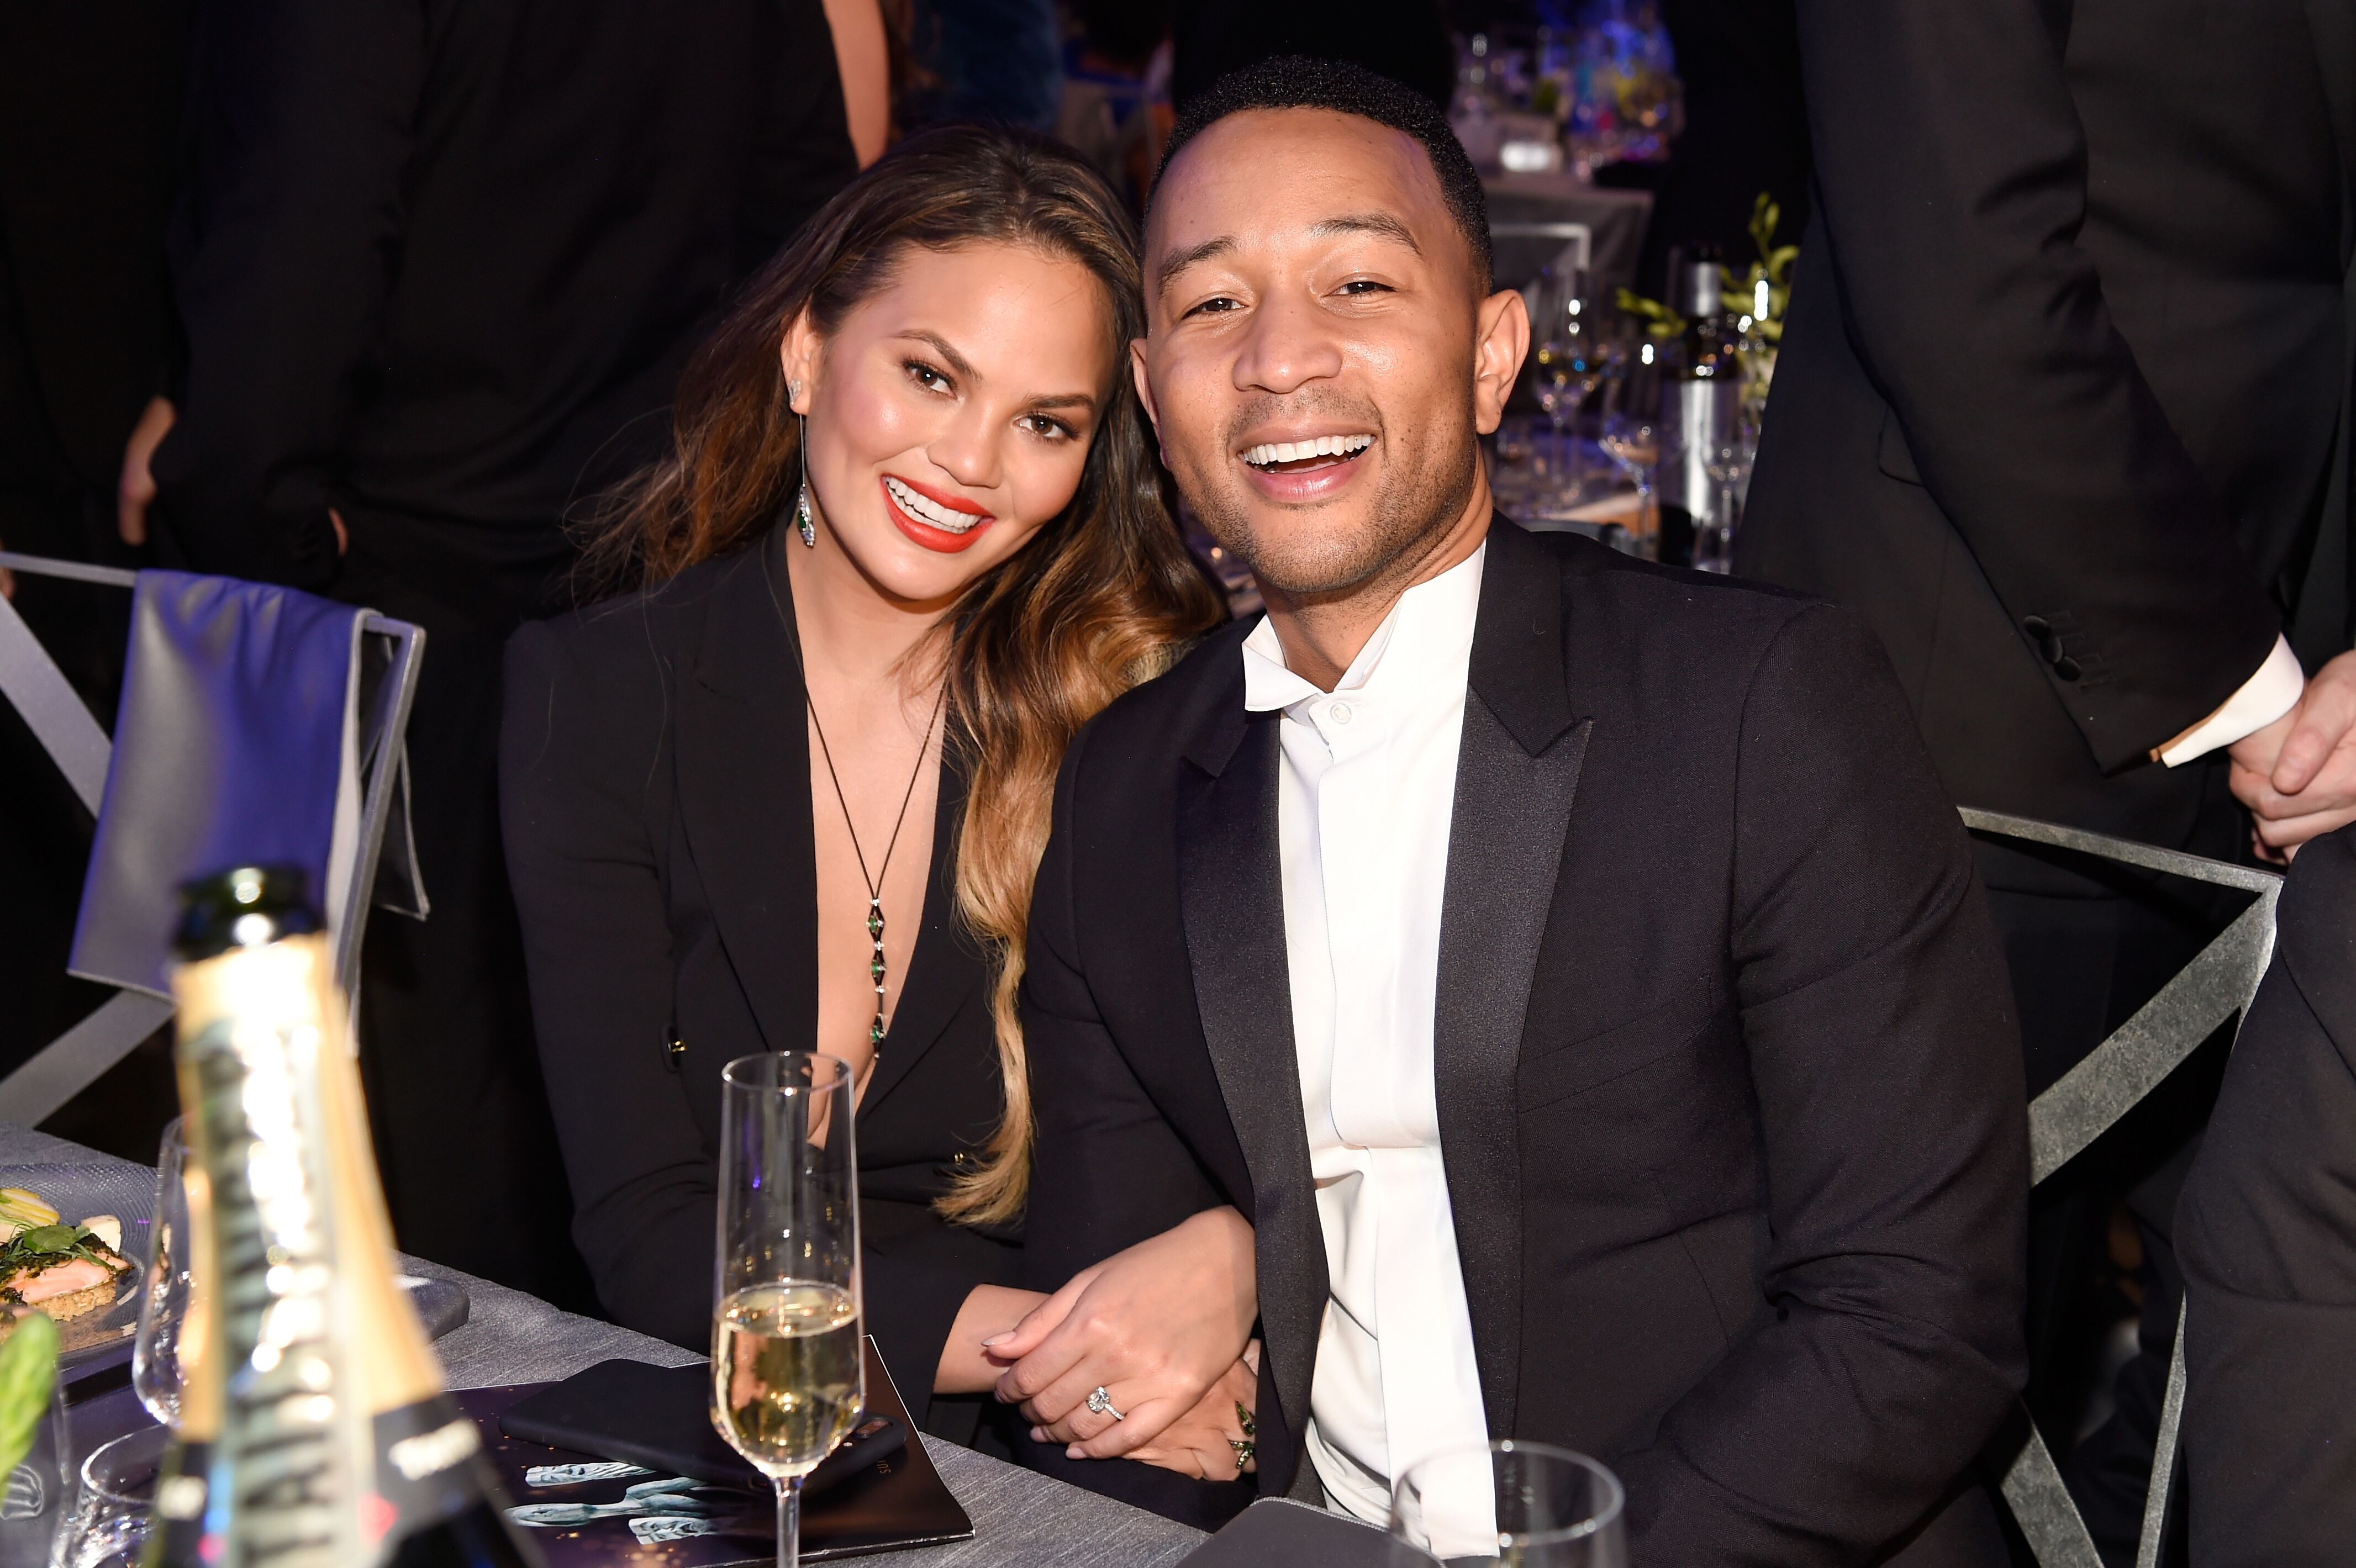 Chrissy Teigen and John Legend during the 23rd Annual Screen Actors Guild Awards at The Shrine Auditorium on January 29, 2017 | Photo: Getty Images